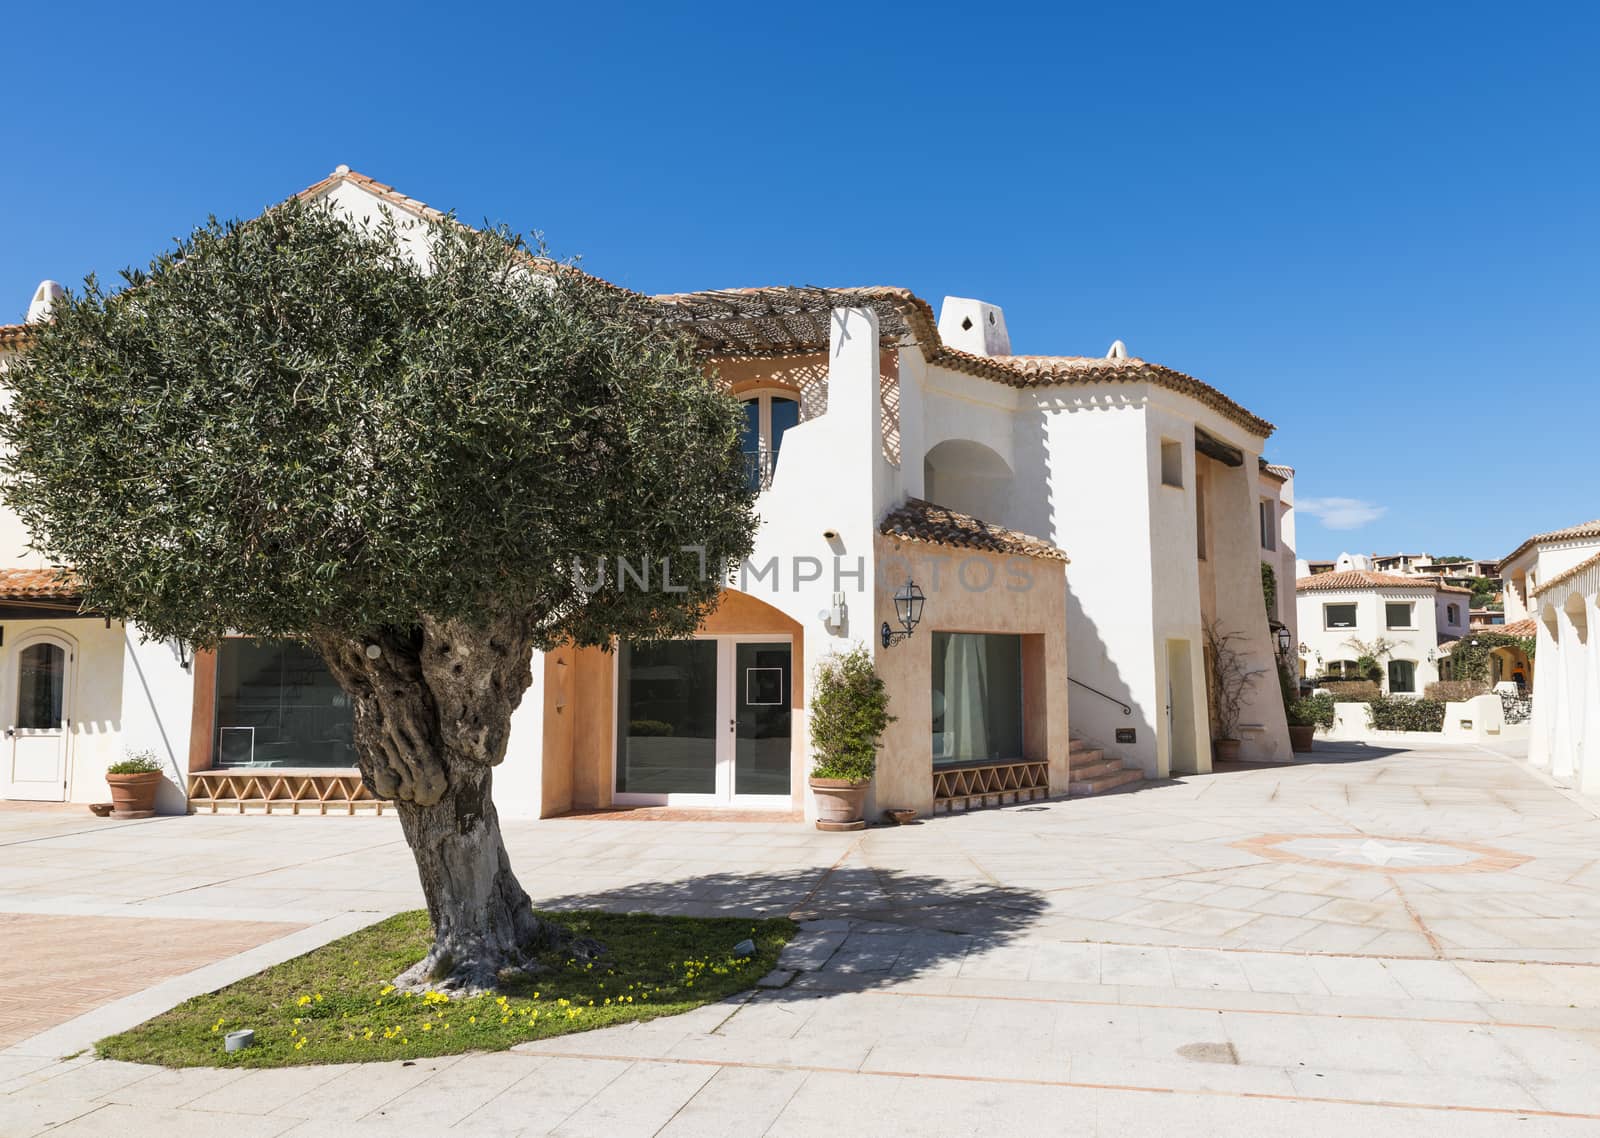 typical italian architecture and big olive tree in the centre of Porto Cervo on the italian island of sardinia, the place where in the summer the rich and famous travel for their exclusive vacation